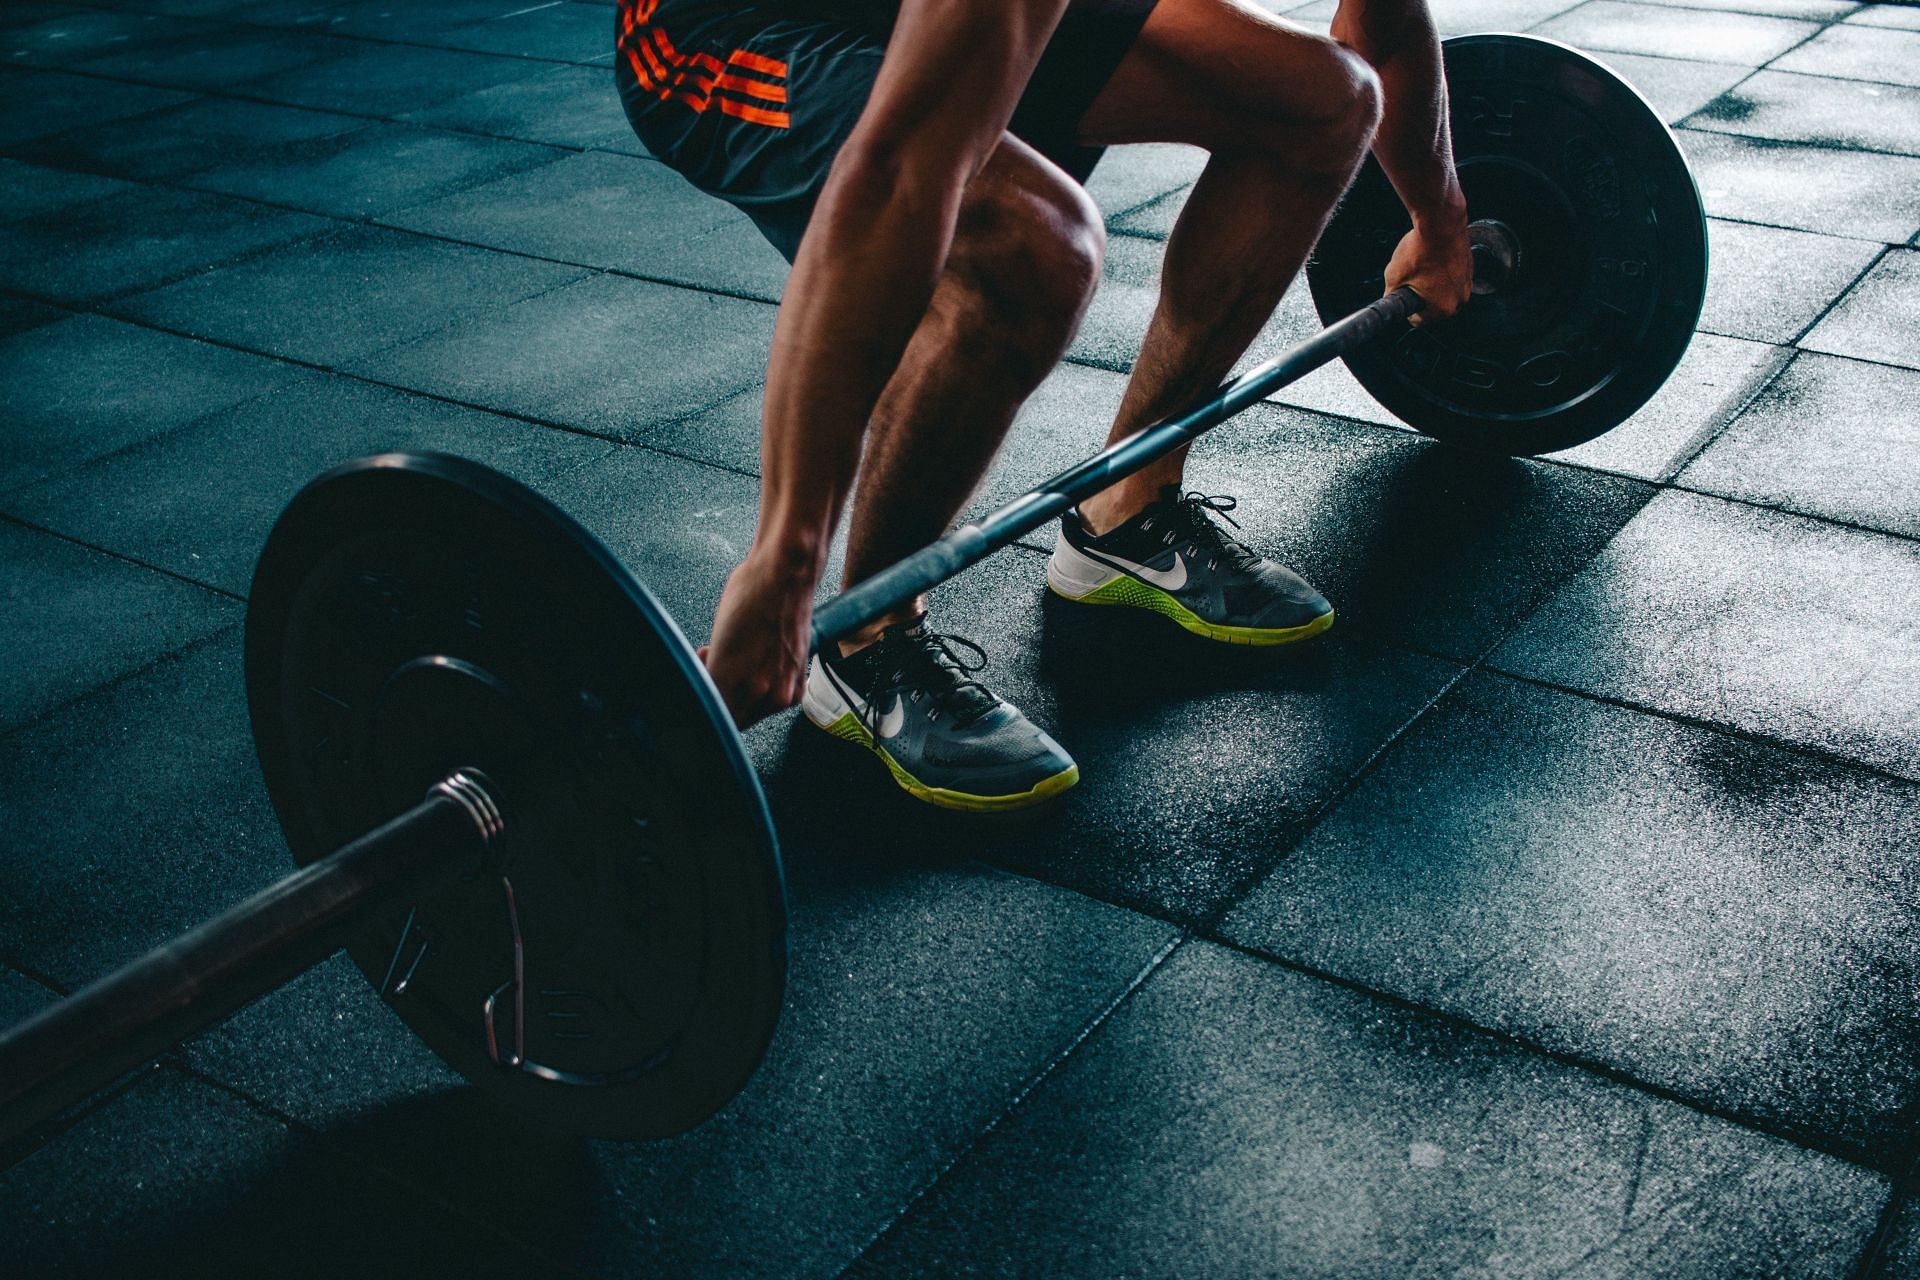 The best way to perform Yates row is to keep your core tight. (Image via Pexels / Victor Freitas)